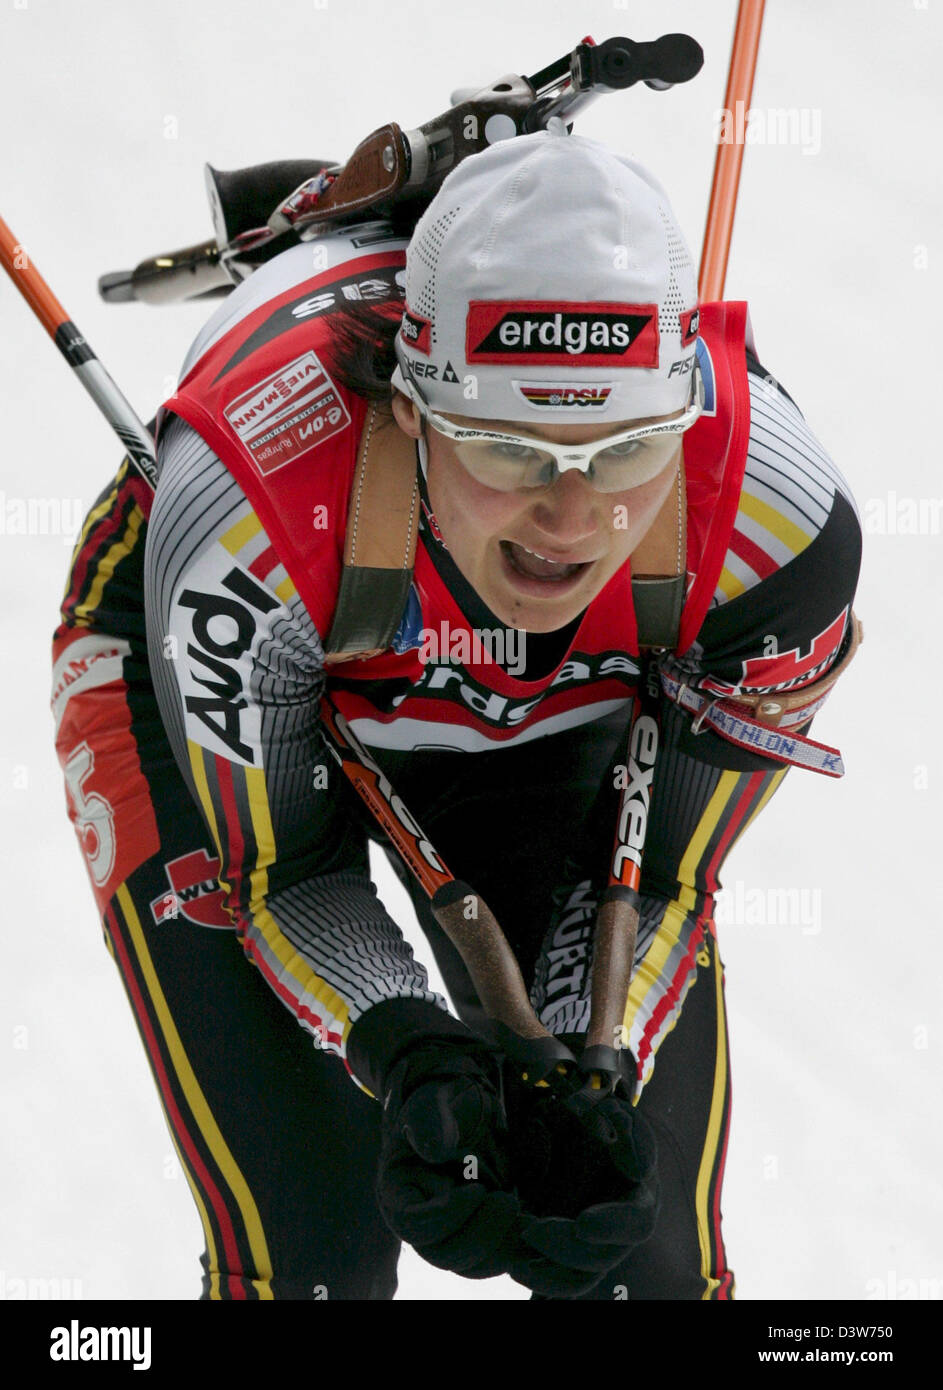 German biathlete Simone Denkinger pictured during the 7.5km sprint in Ruhpolding, Germany, Friday, 12 January 2007. Photo: Matthias Schrader Stock Photo